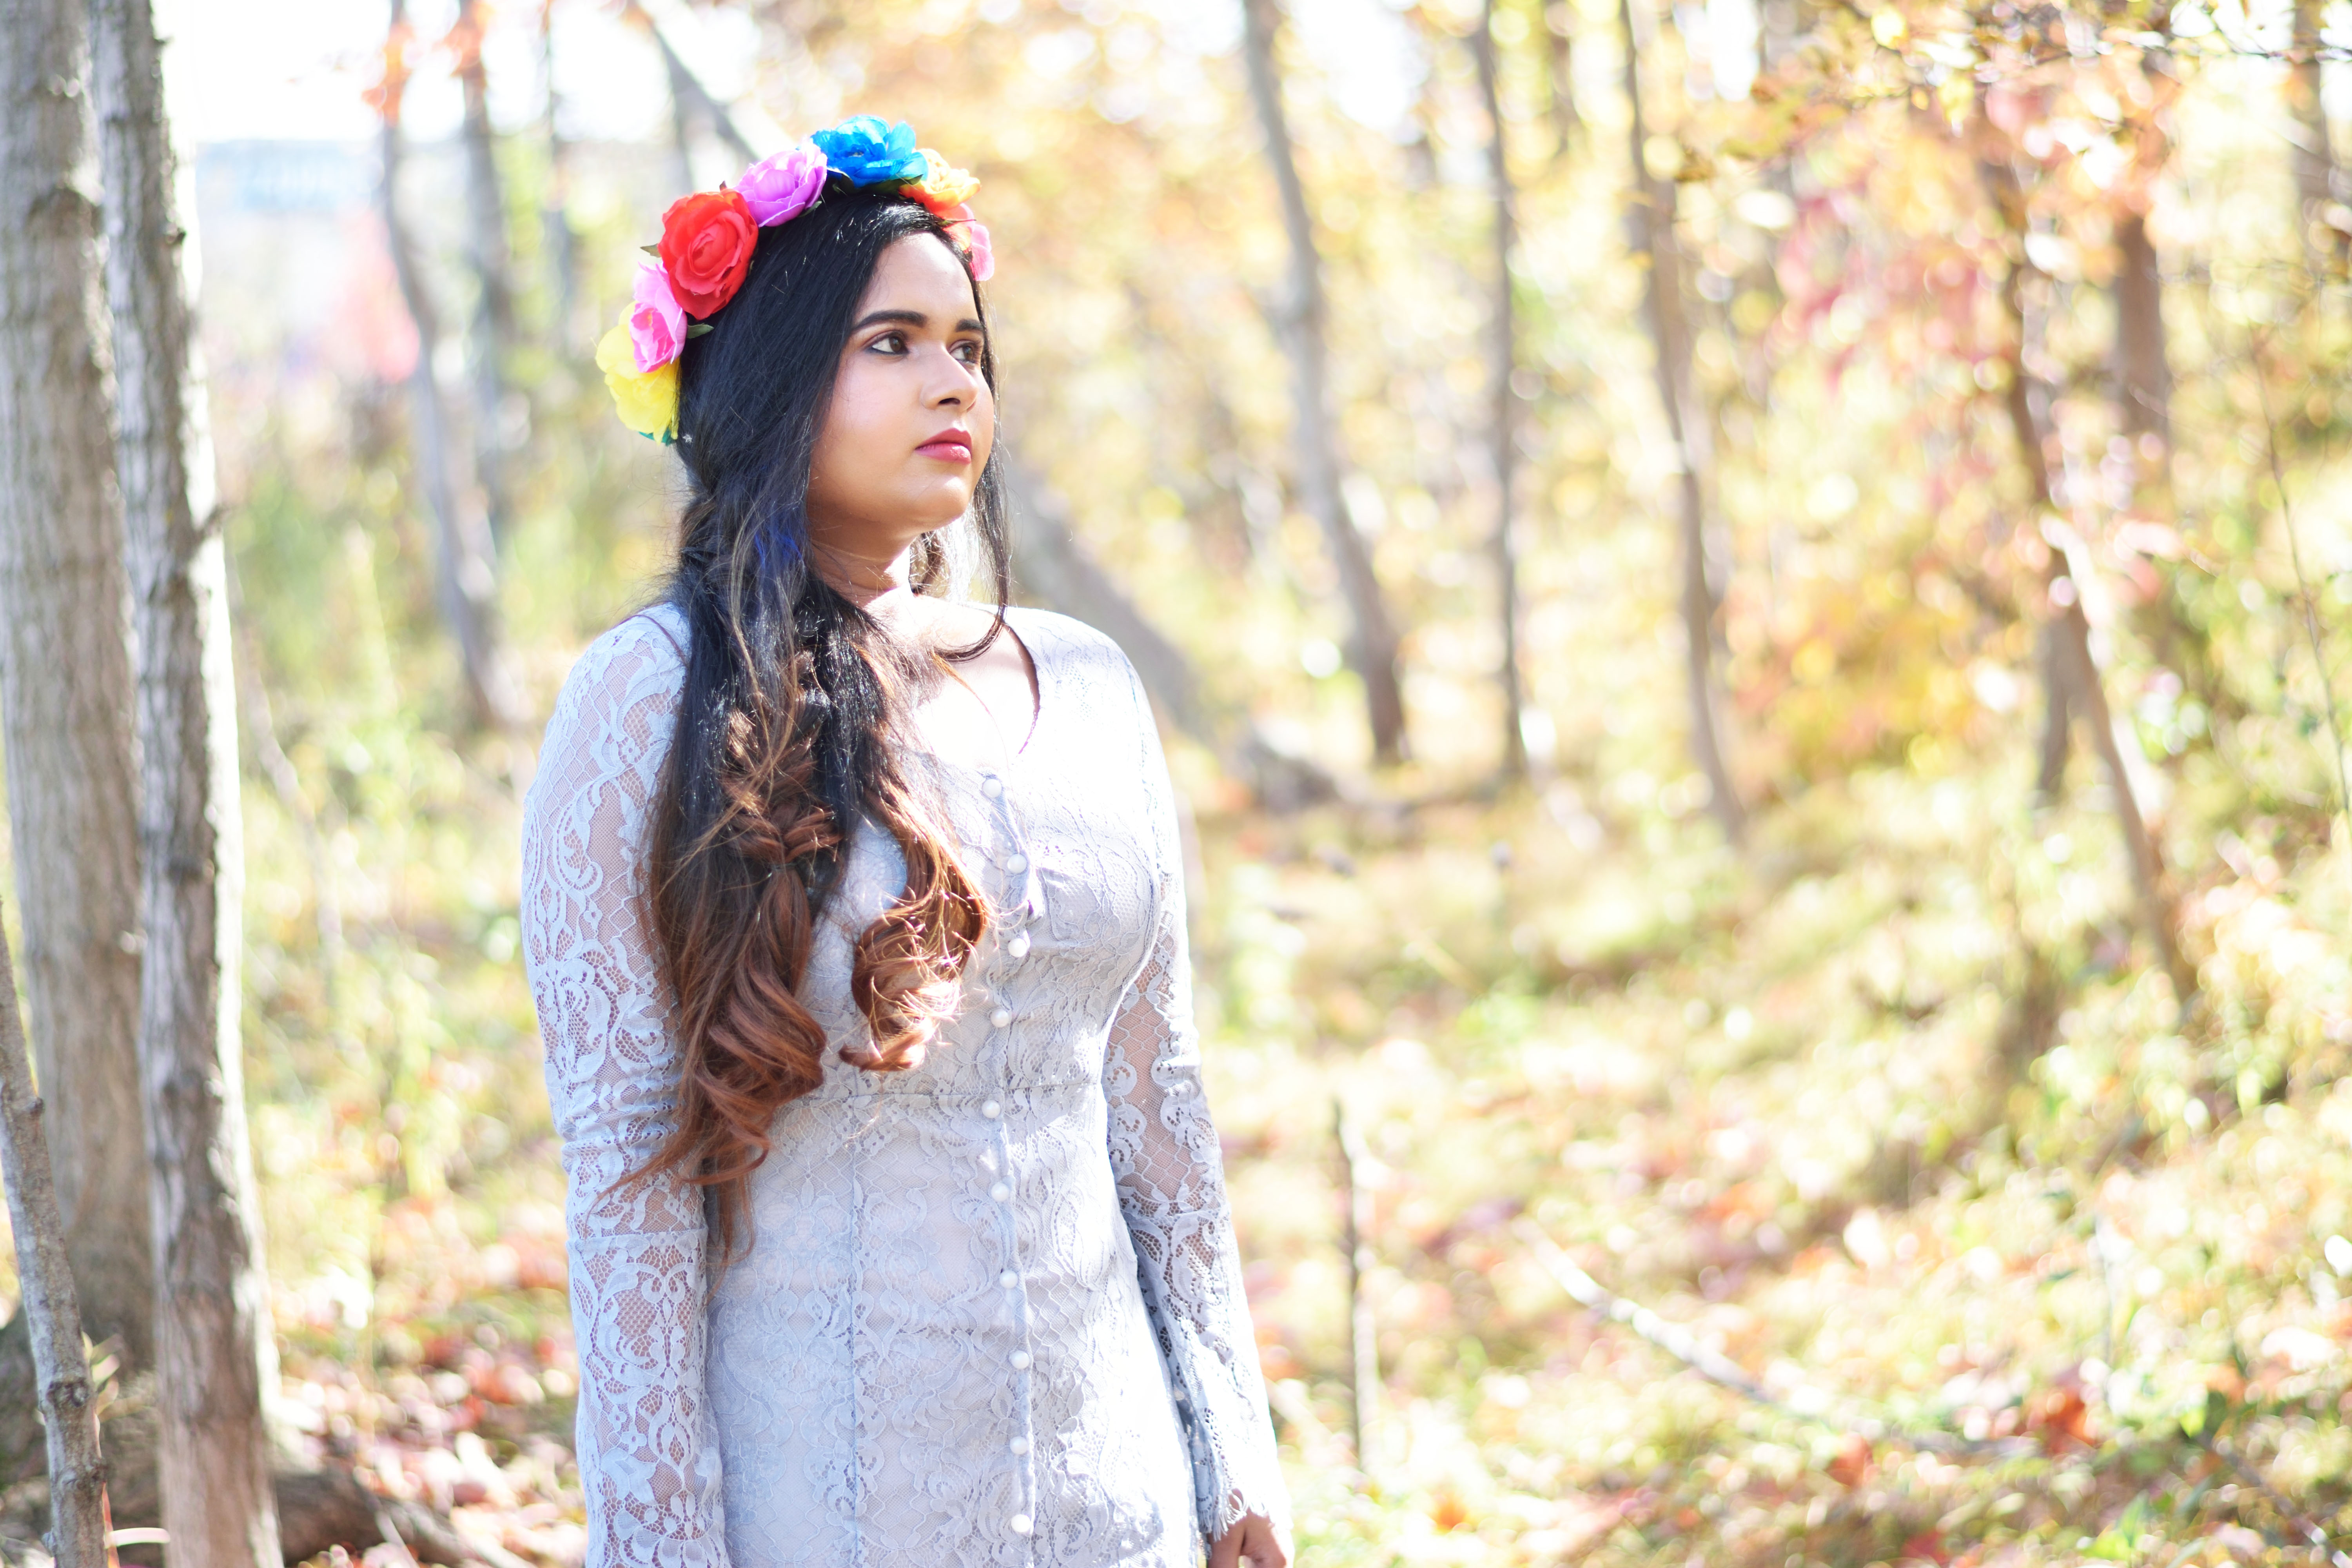 Dreamy princess look with Grey Lace dress from Lookbook Store